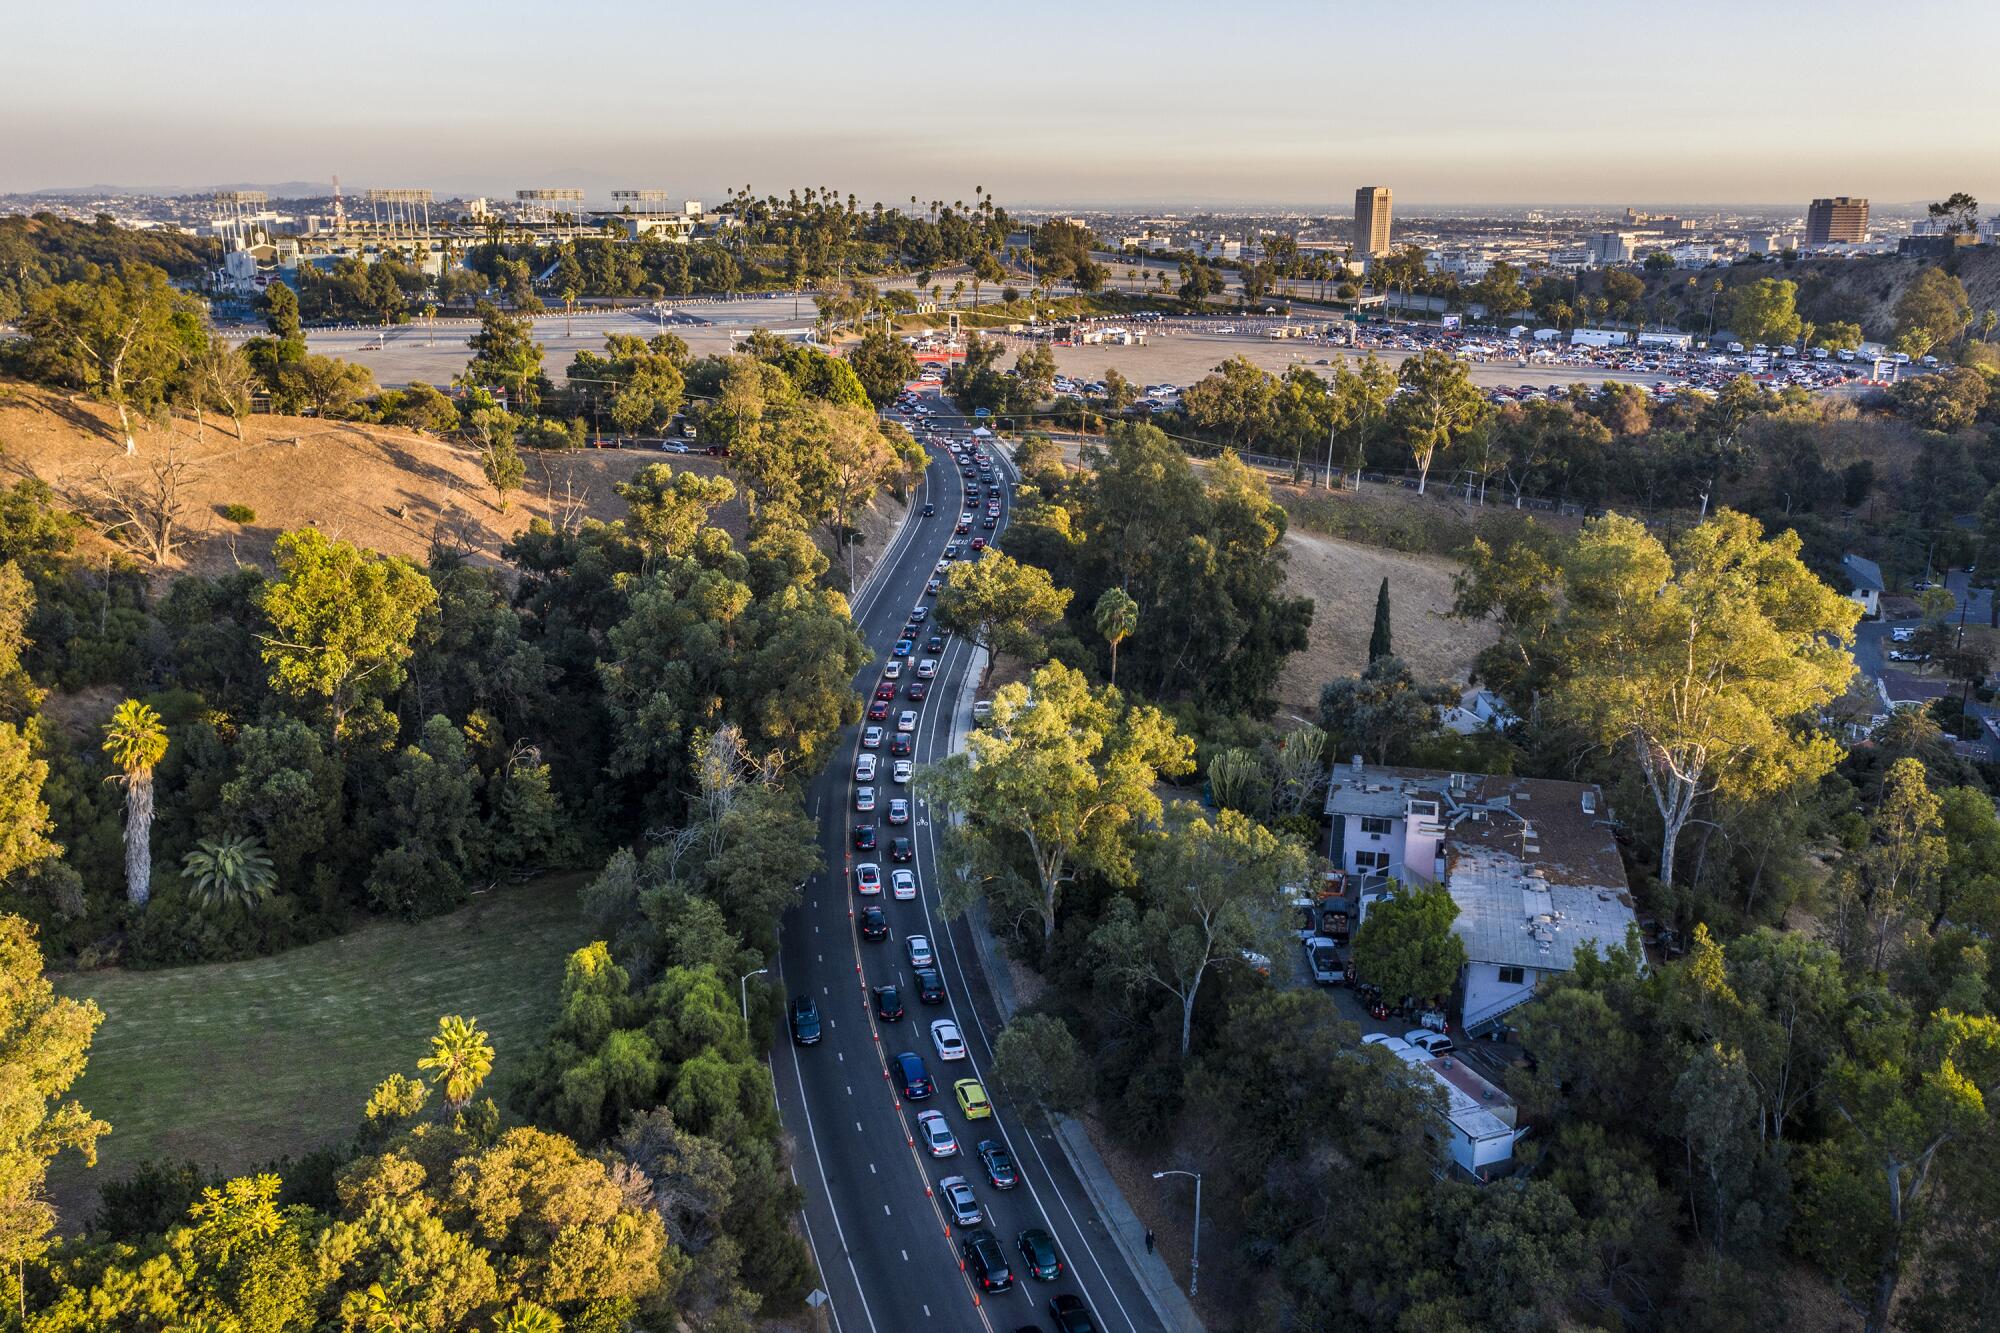 An aerial view shows two lanes packed with cars on a road leading to Dodger Stadium lined with parkland and trees.